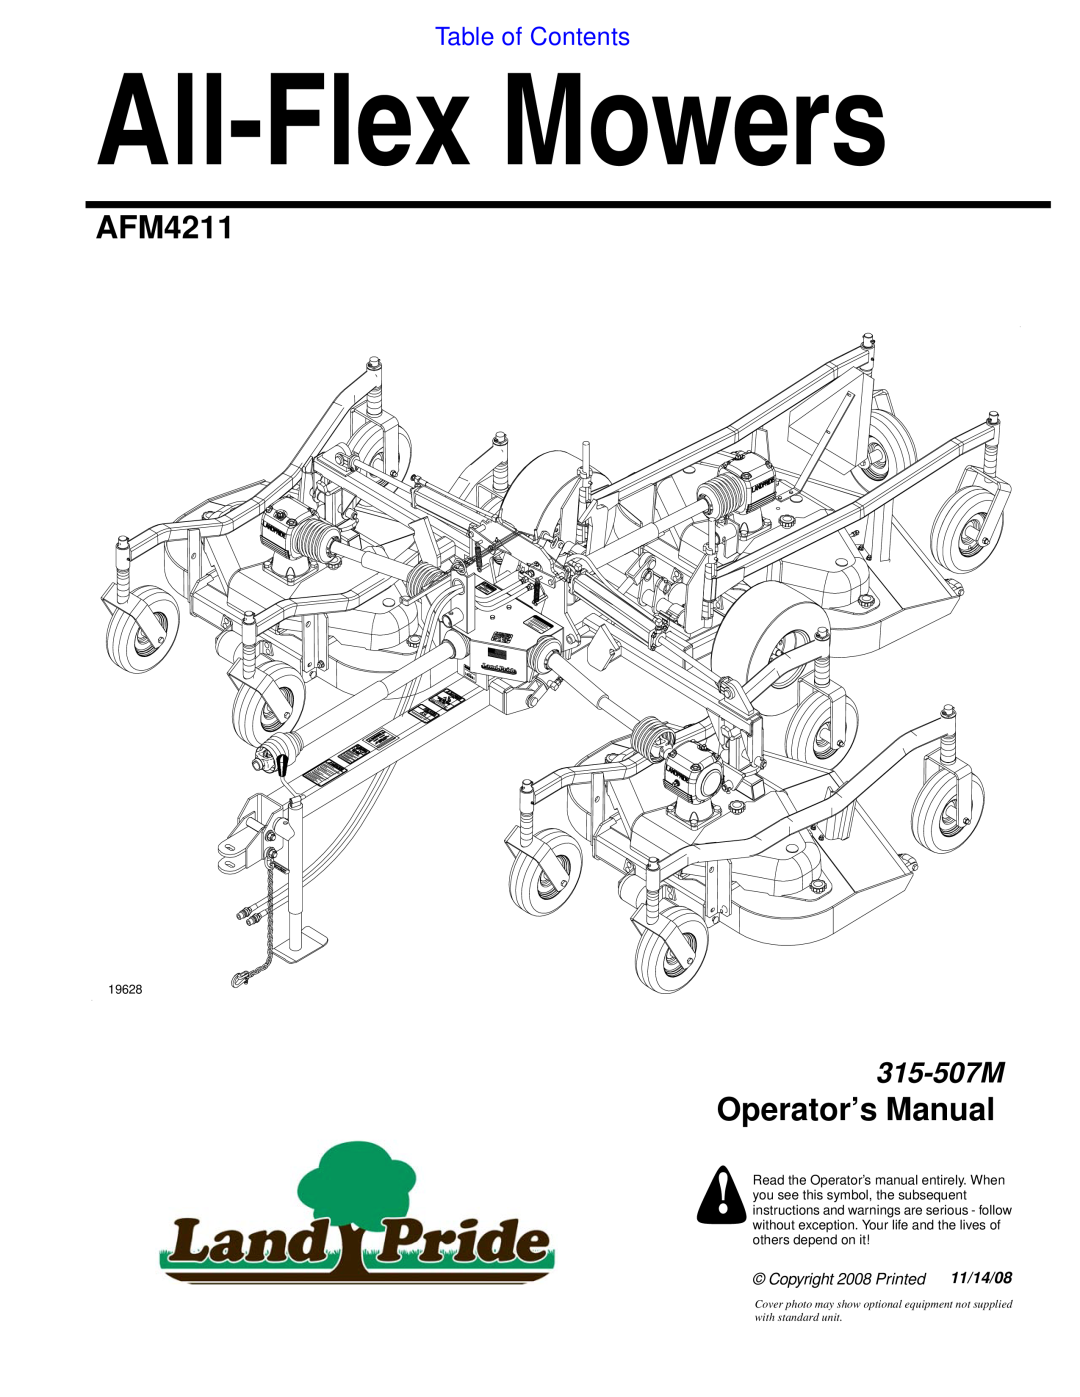 Land Pride AFM4211 manual Table of Contents Part Number Index, All-FlexMower, Parts Manual, 315-507P, others depend on it 